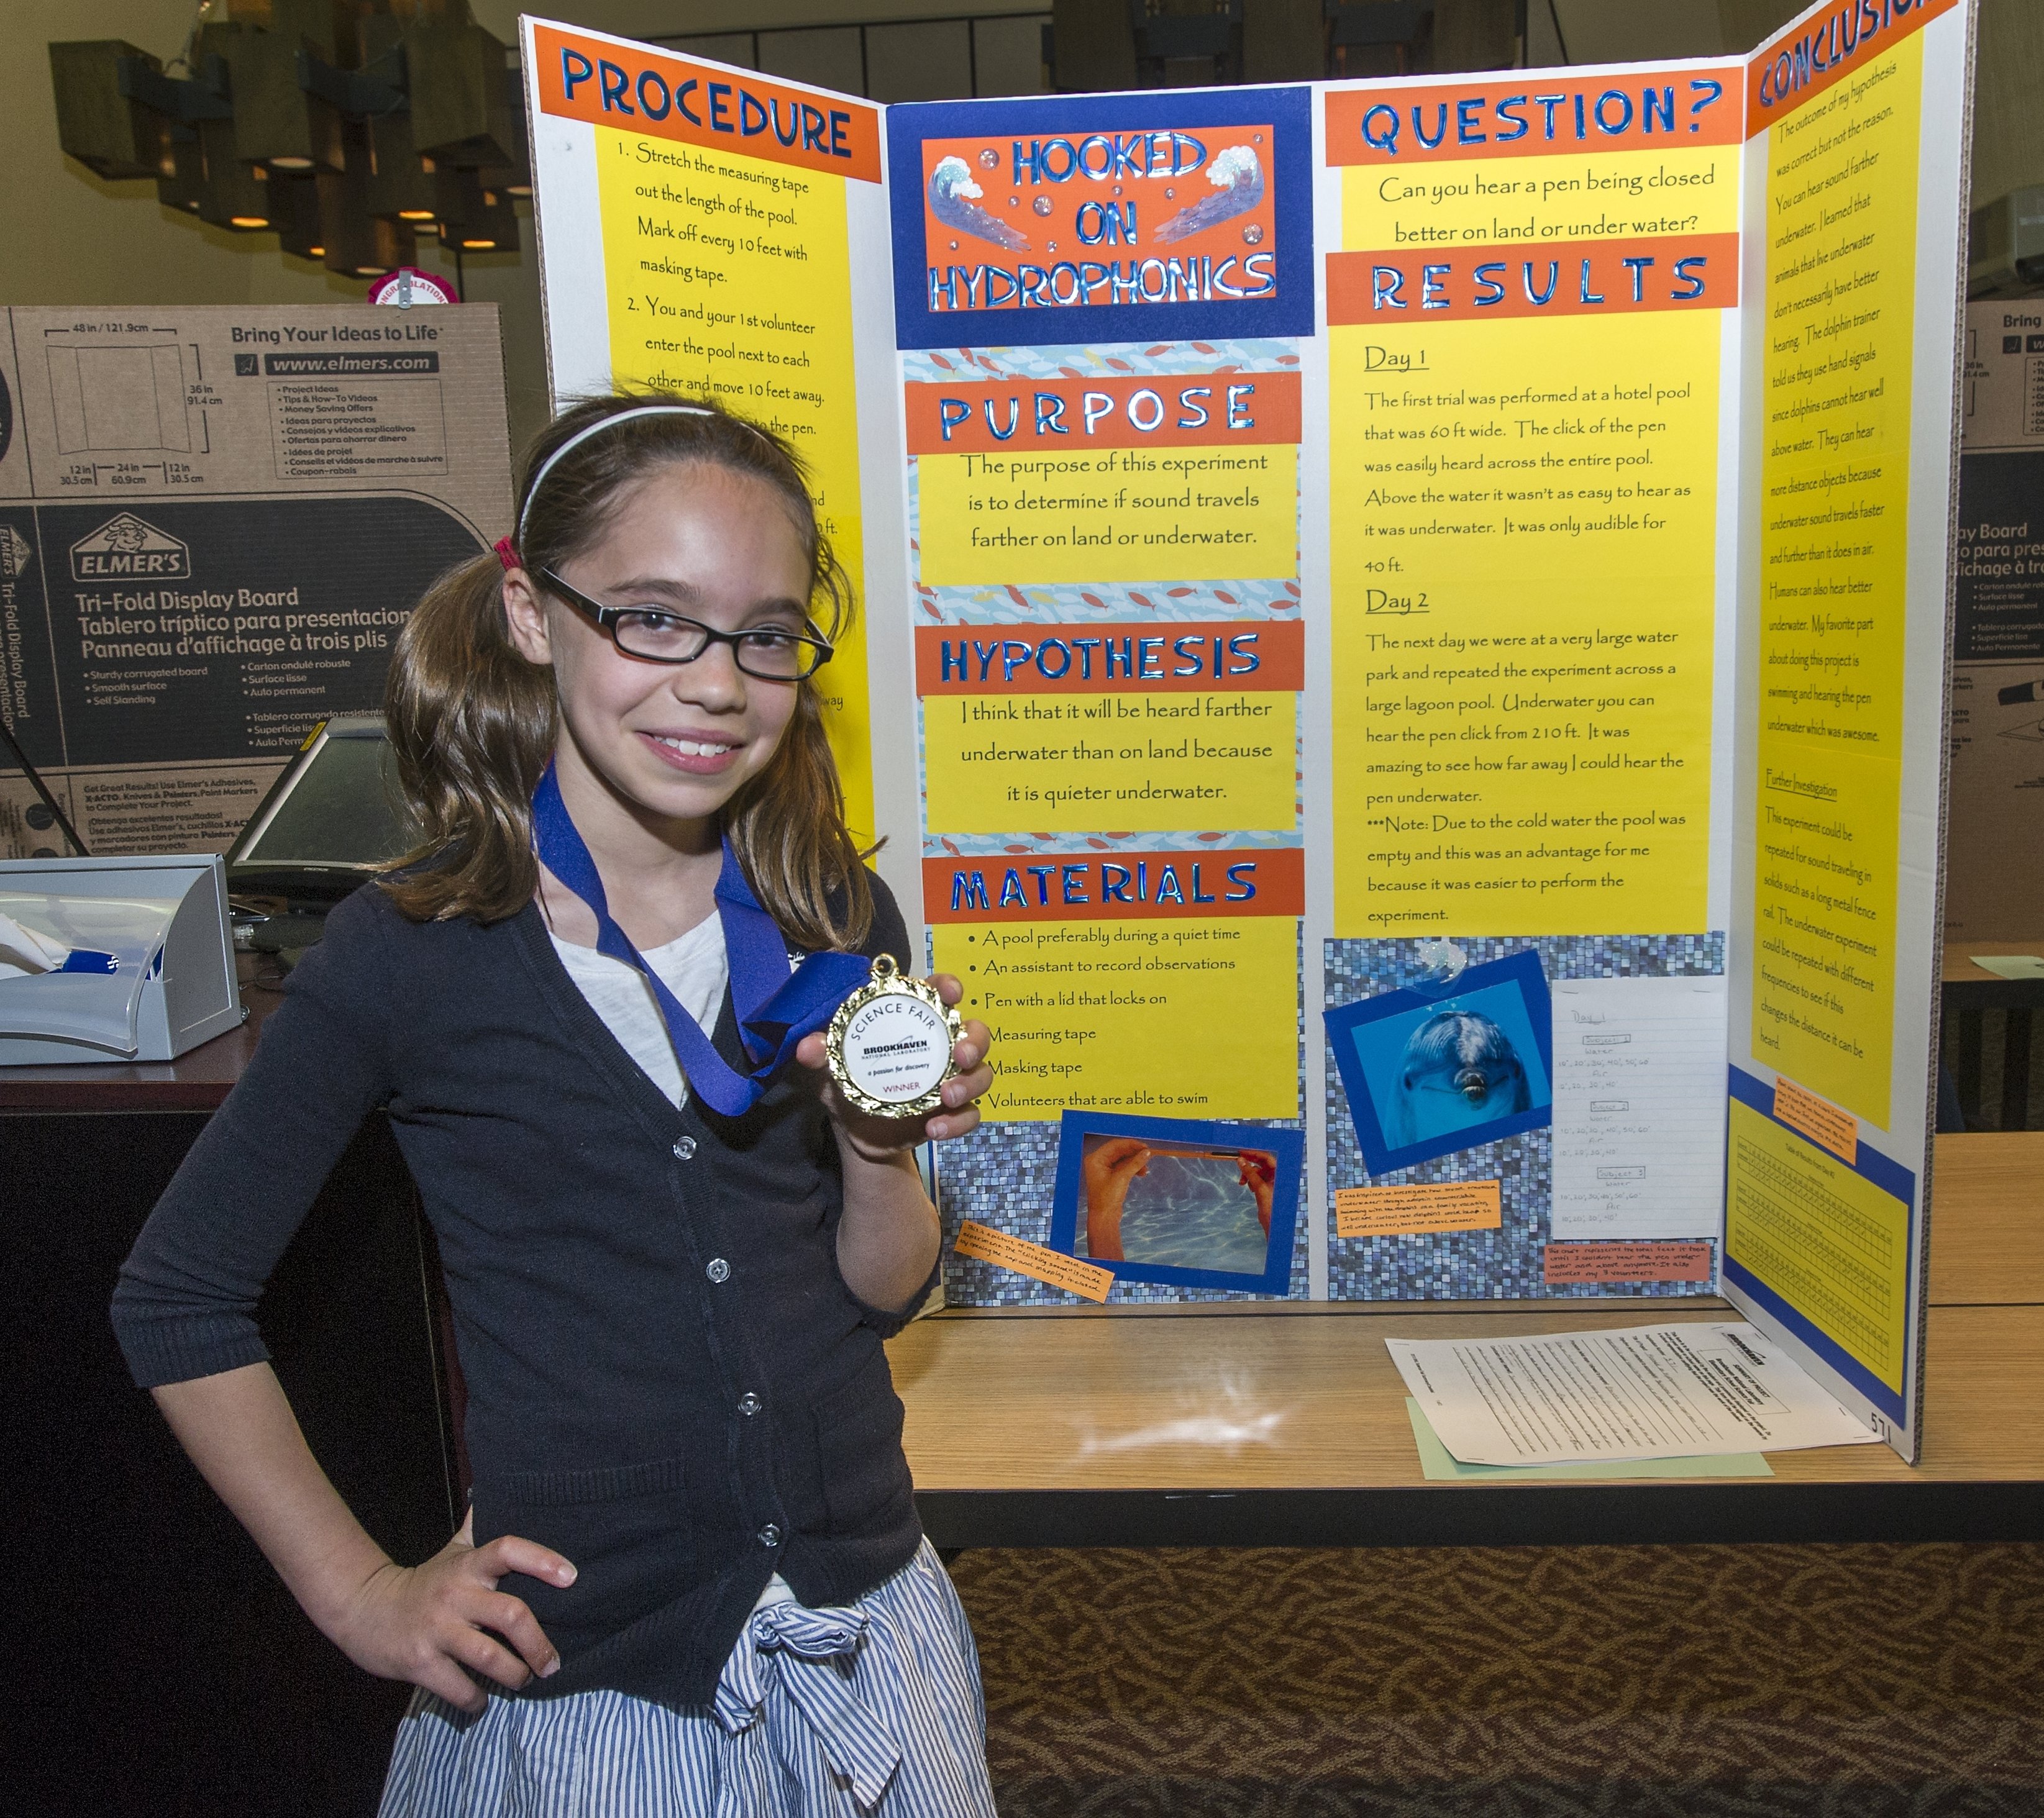 10 Most Popular Ideas For Science Fair Projects For 5Th Graders karmamatopoeia science fair projects bunch ideas of 5th grade 2022